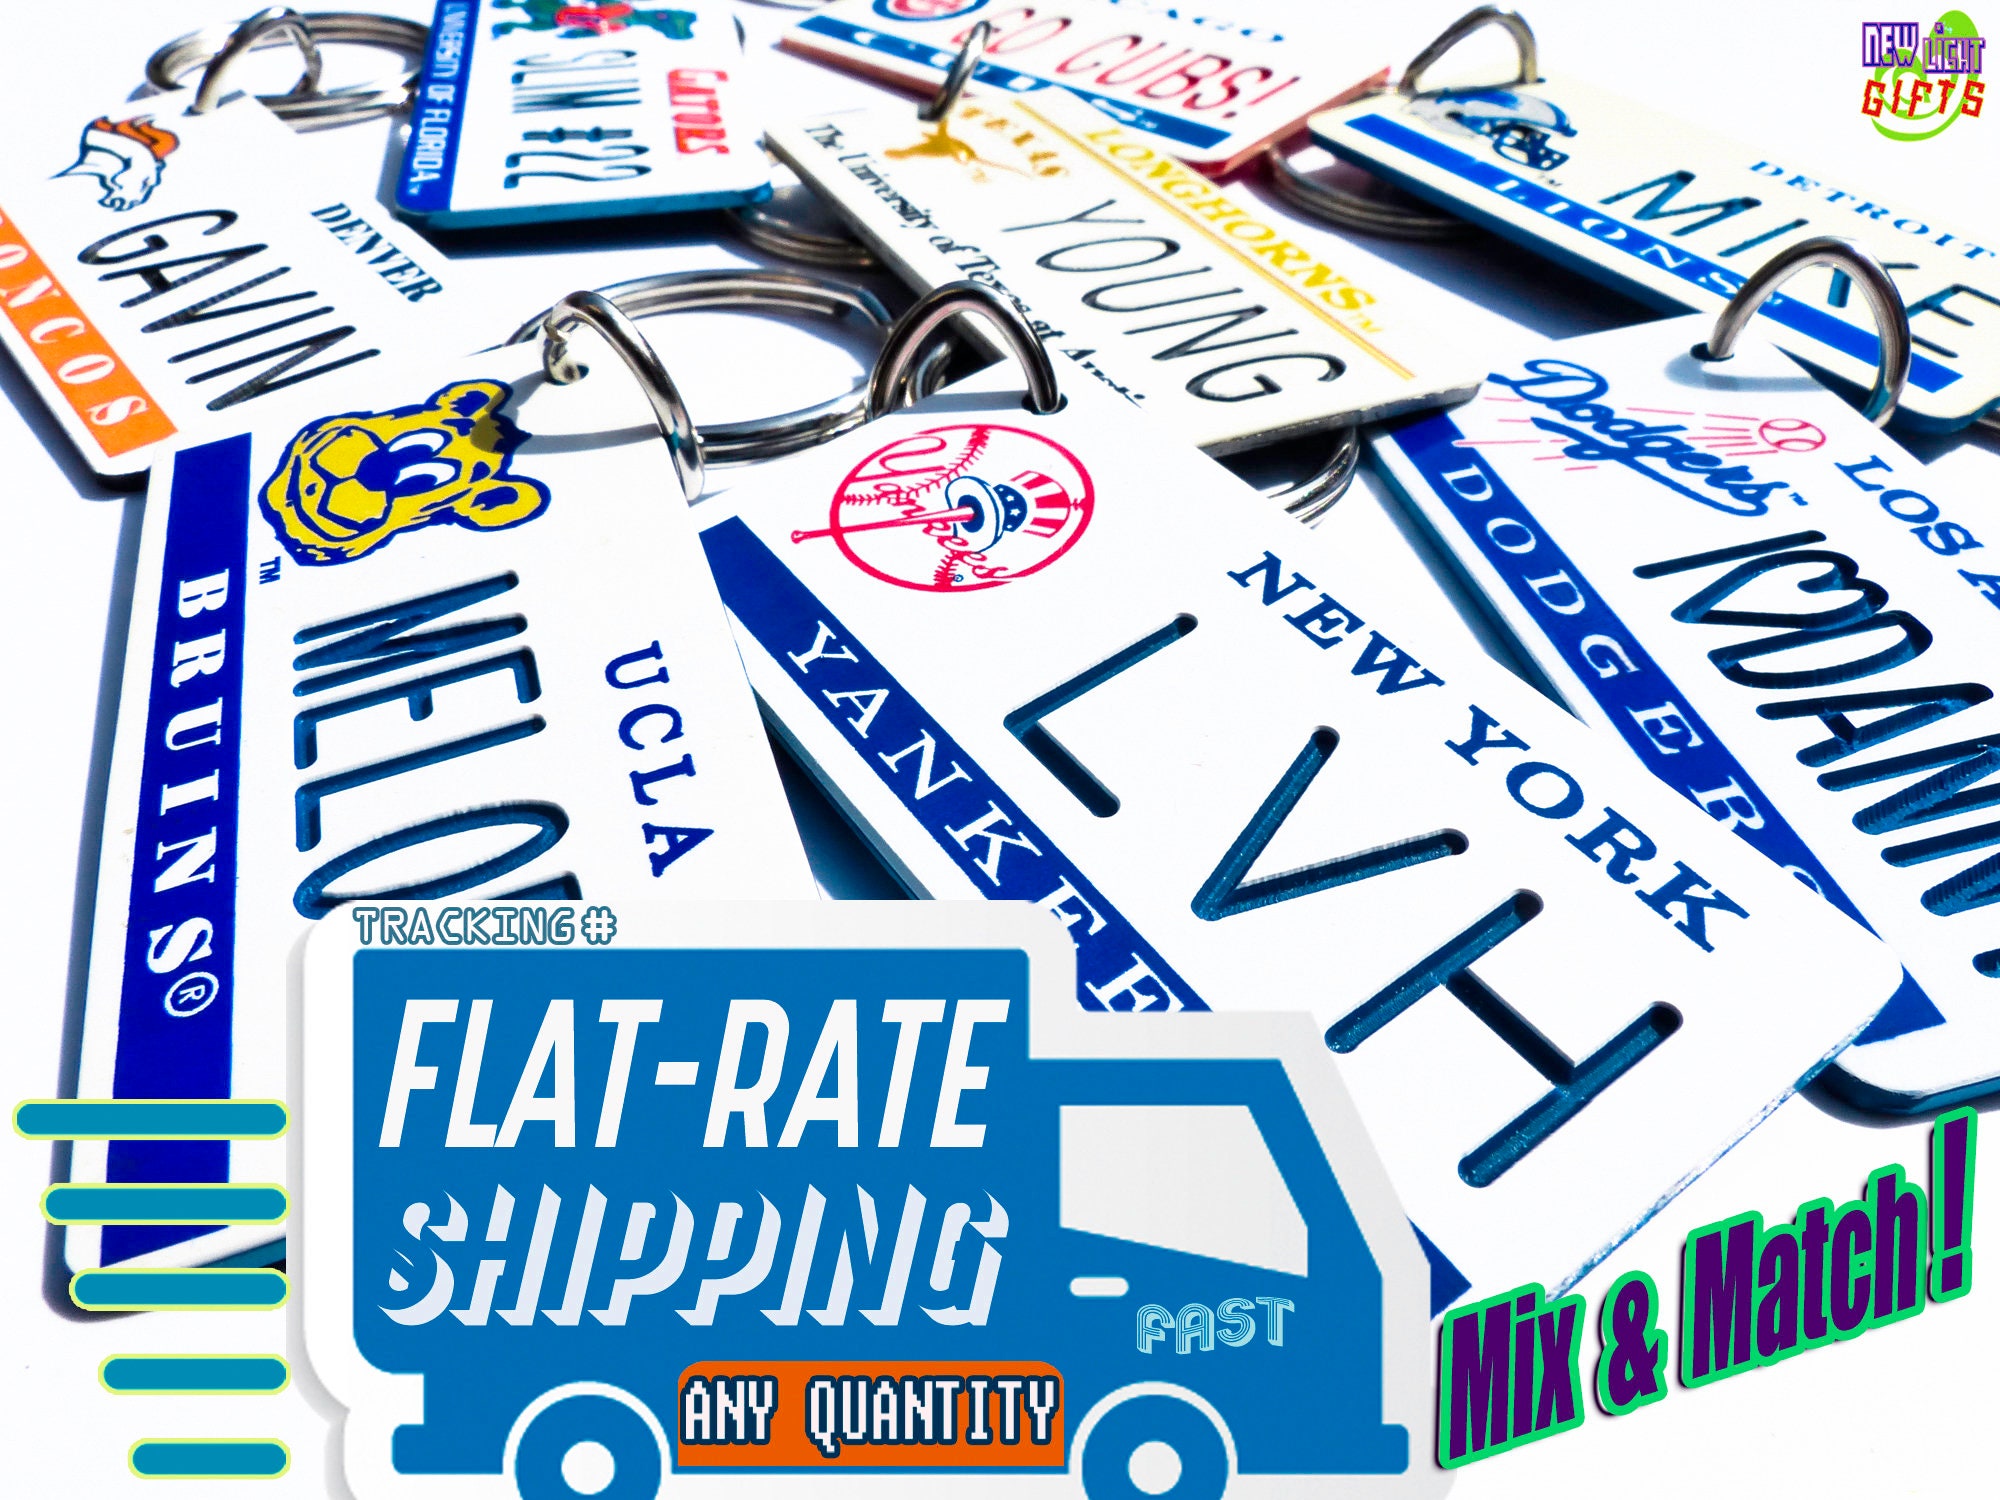 State License Plate Keychains - Your Event Source